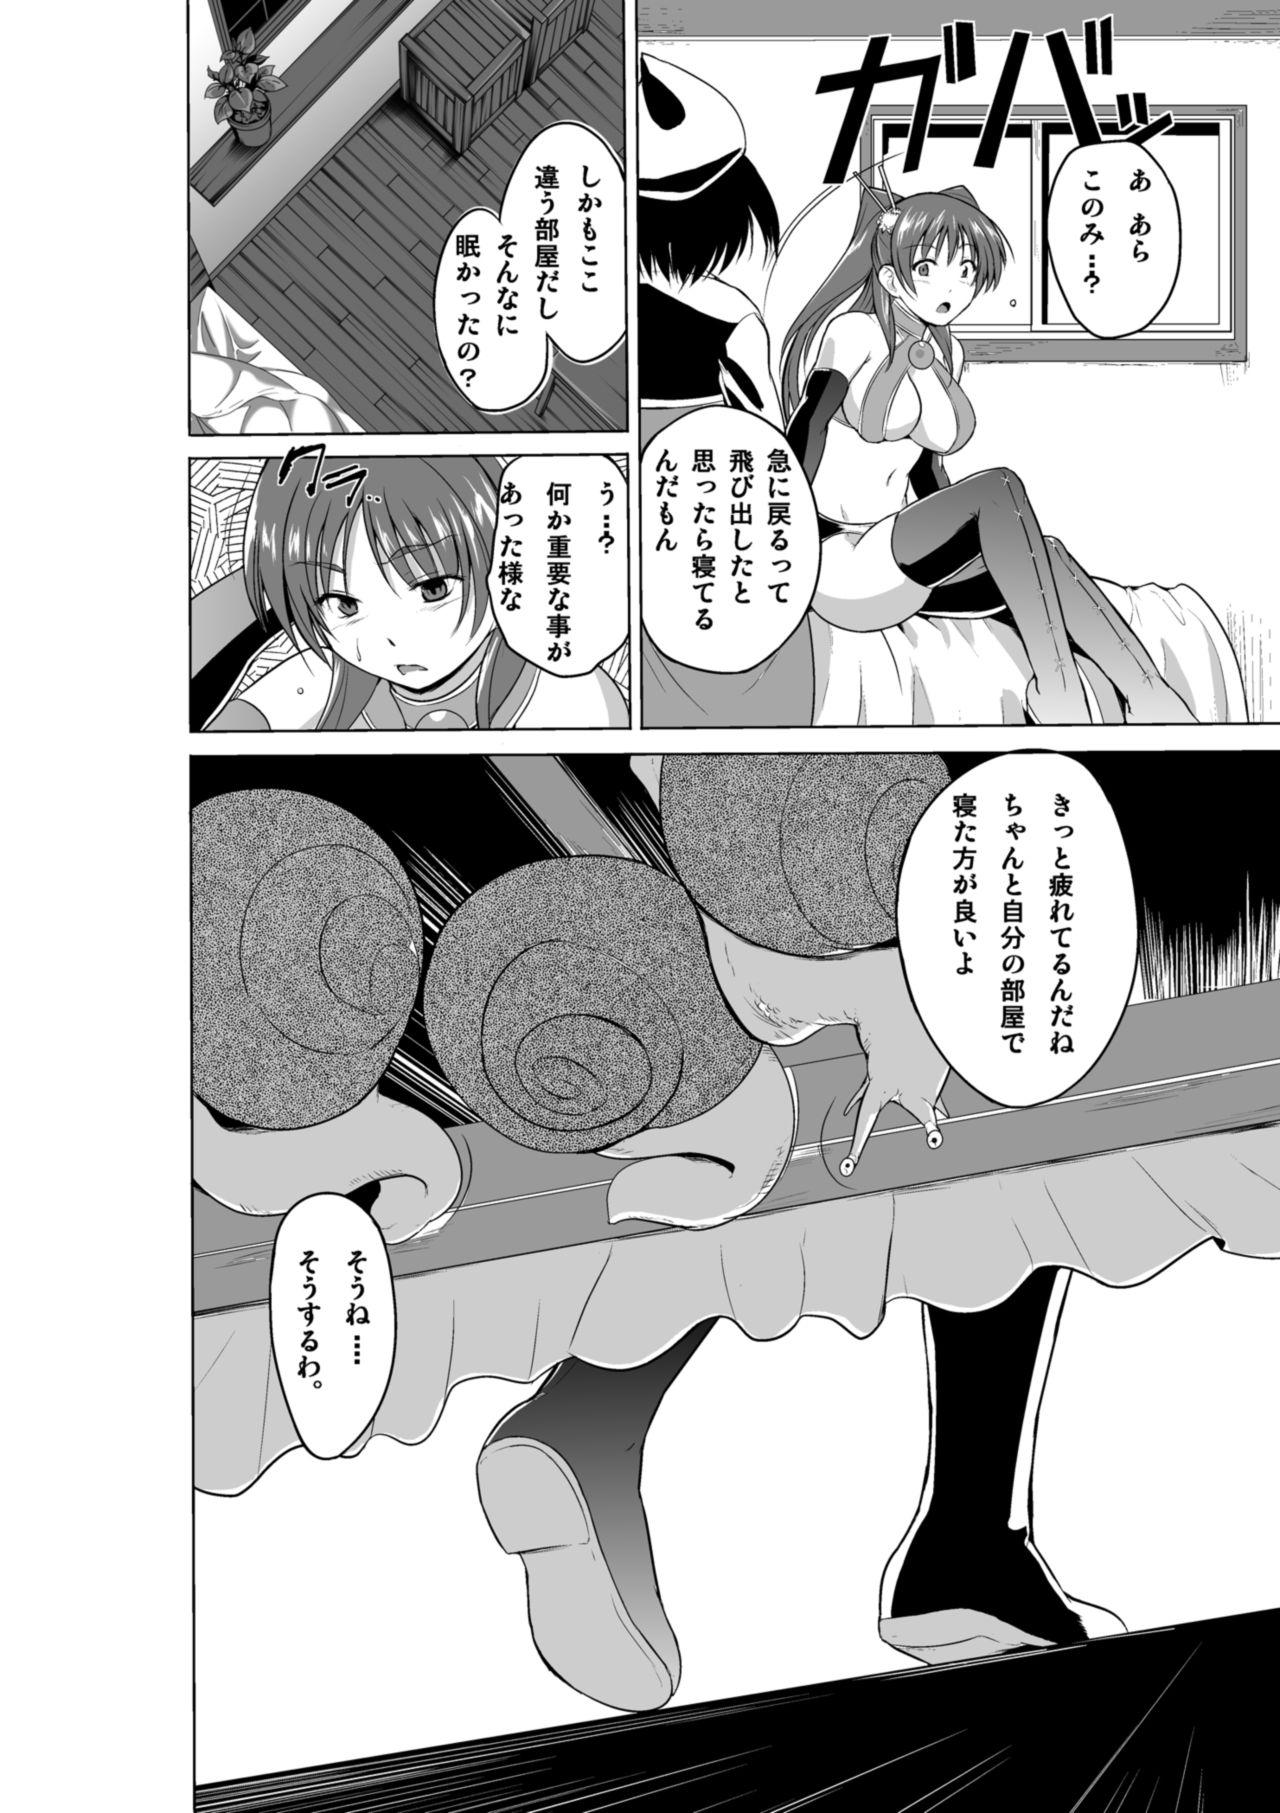 Doggystyle Porn Dungeon Travelers Nanako no Himegoto - Toheart2 Inked - Page 28